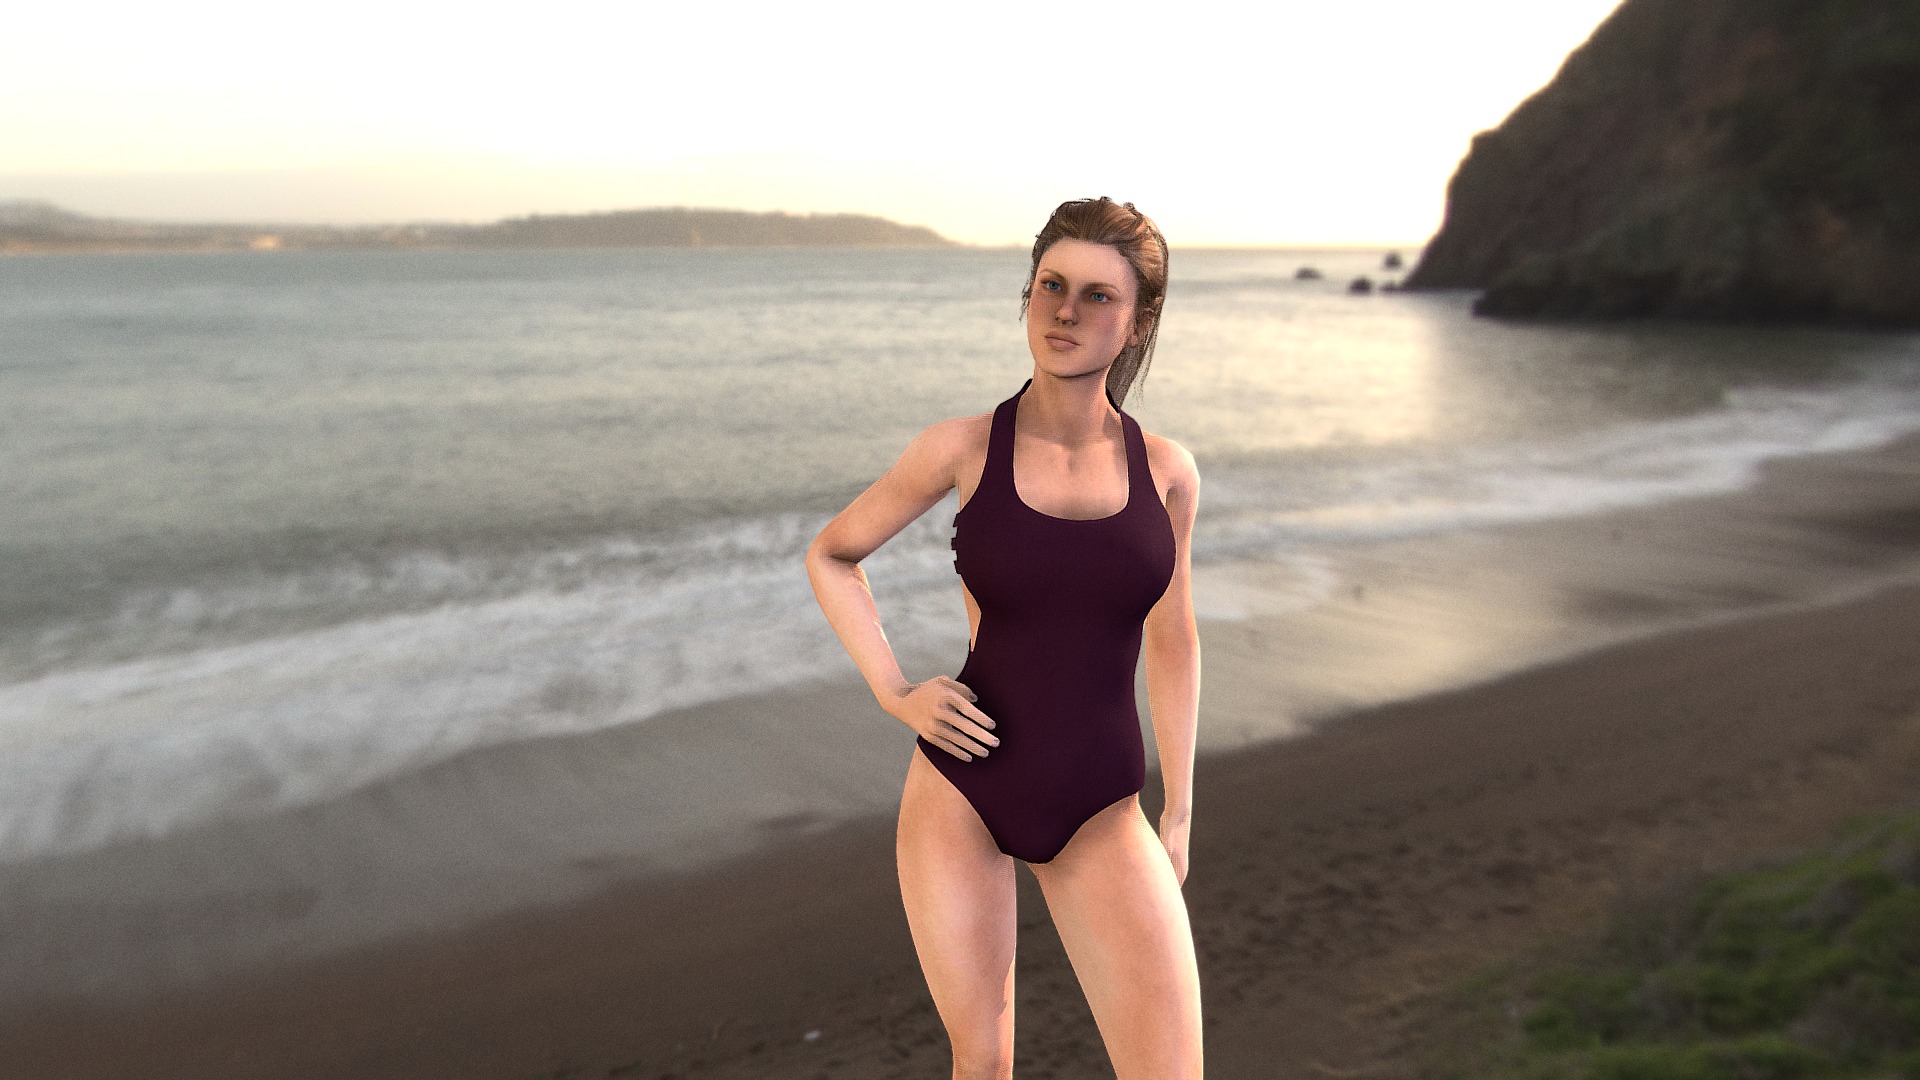 3D model Swimsuit - This is a 3D model of the Swimsuit. The 3D model is about a woman standing on a beach.